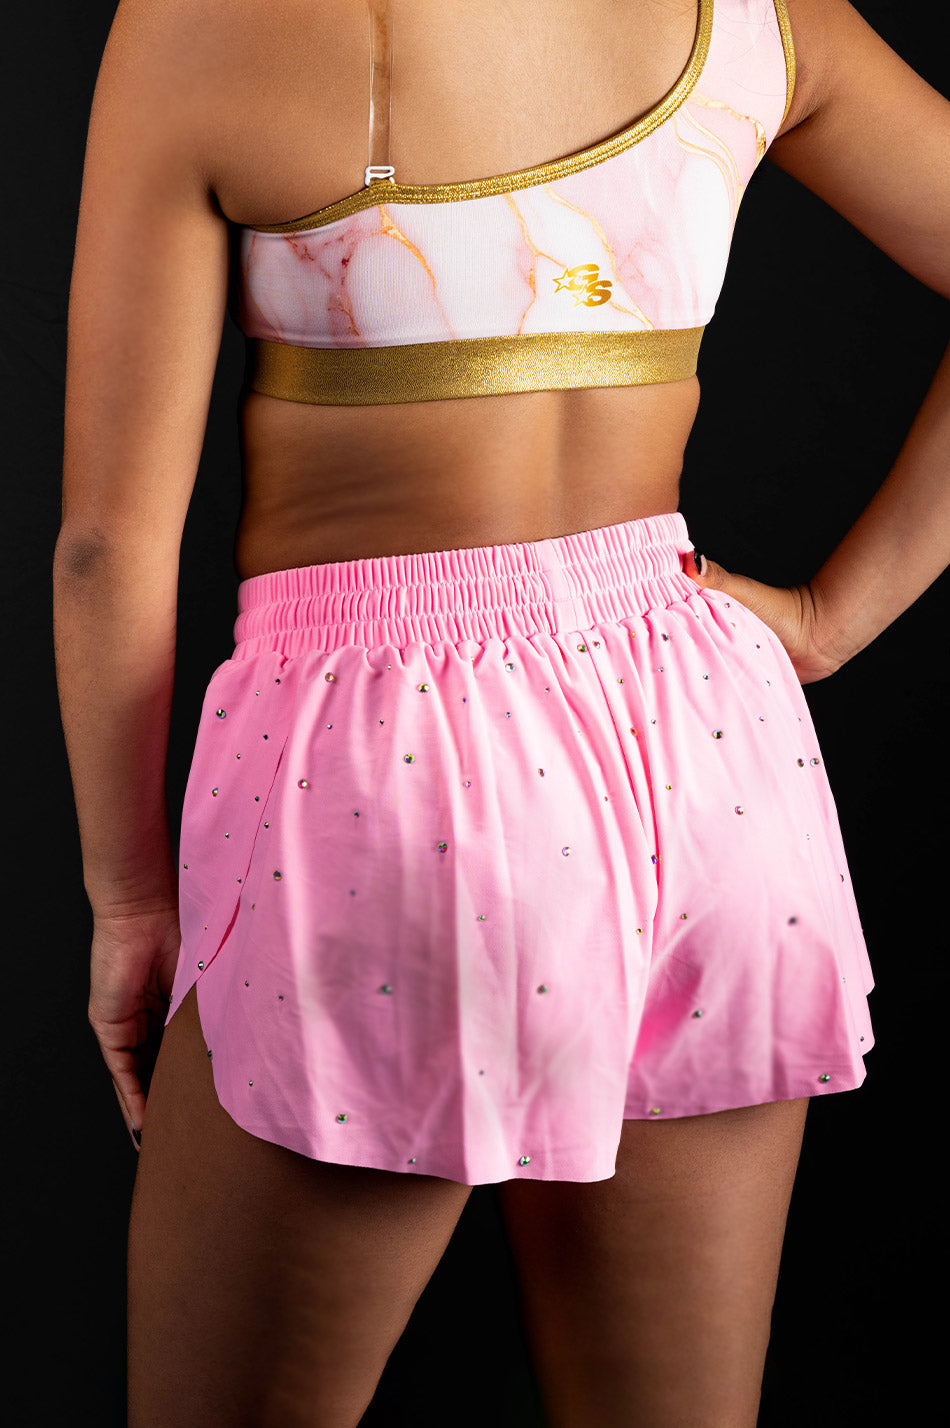 Light Pink Fly shorts with Gold Spanx